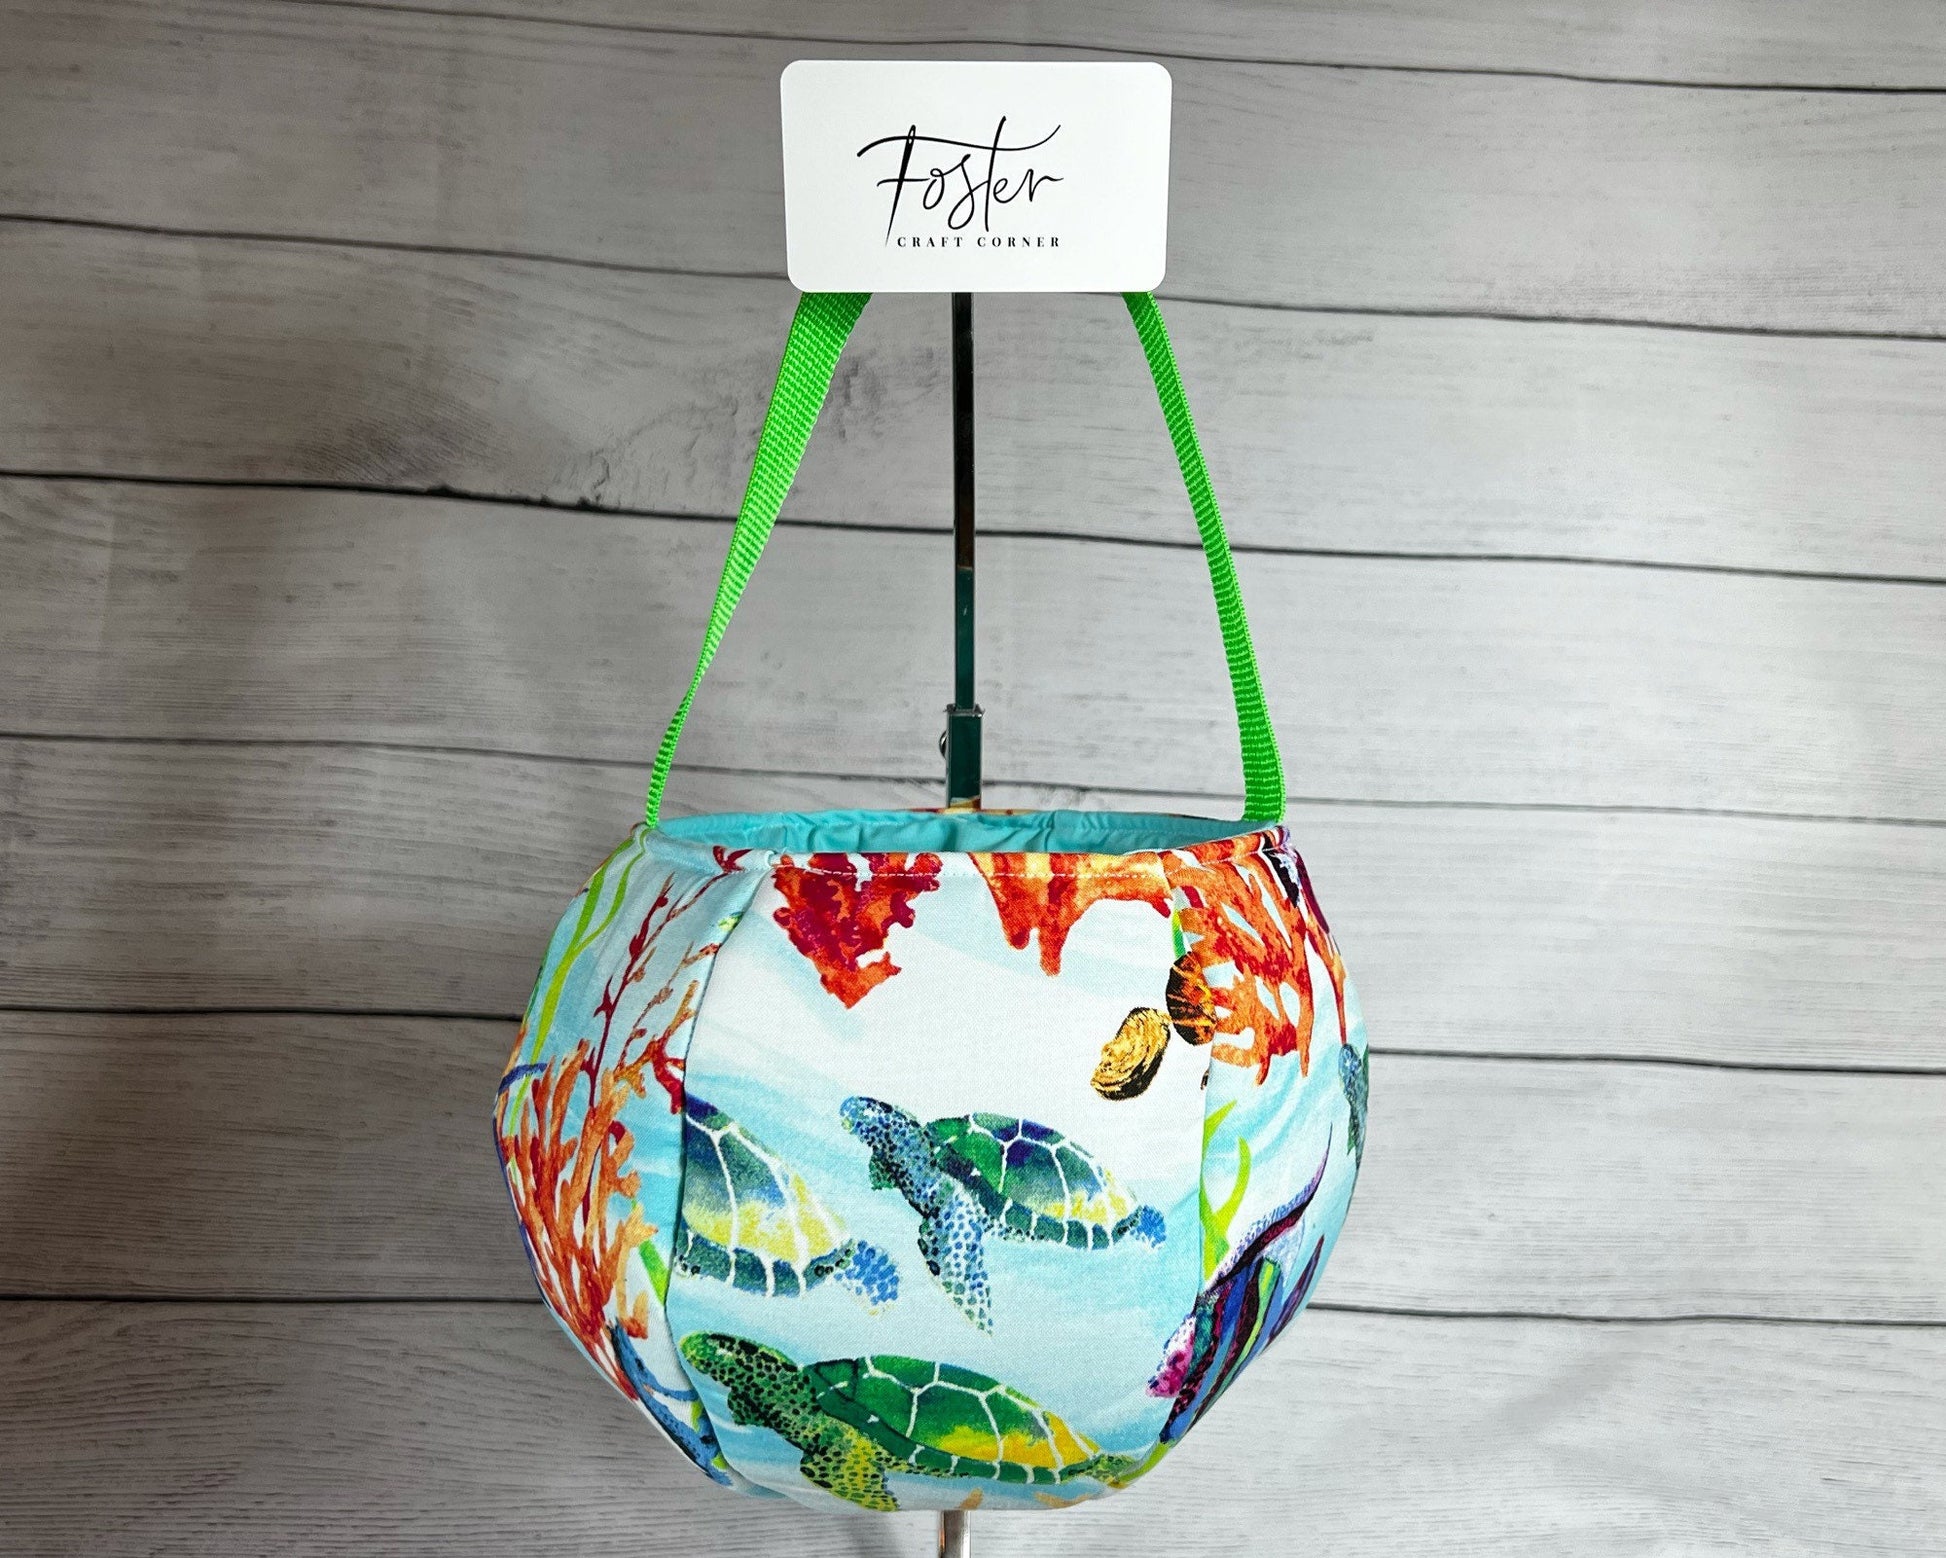 Ocean Tote Bag - Bag - Tote - Fish - Turtles - Tortoise - Coral Reef - Clam Shell - Party - Gift - Everyday - Holiday - Easter - Halloween